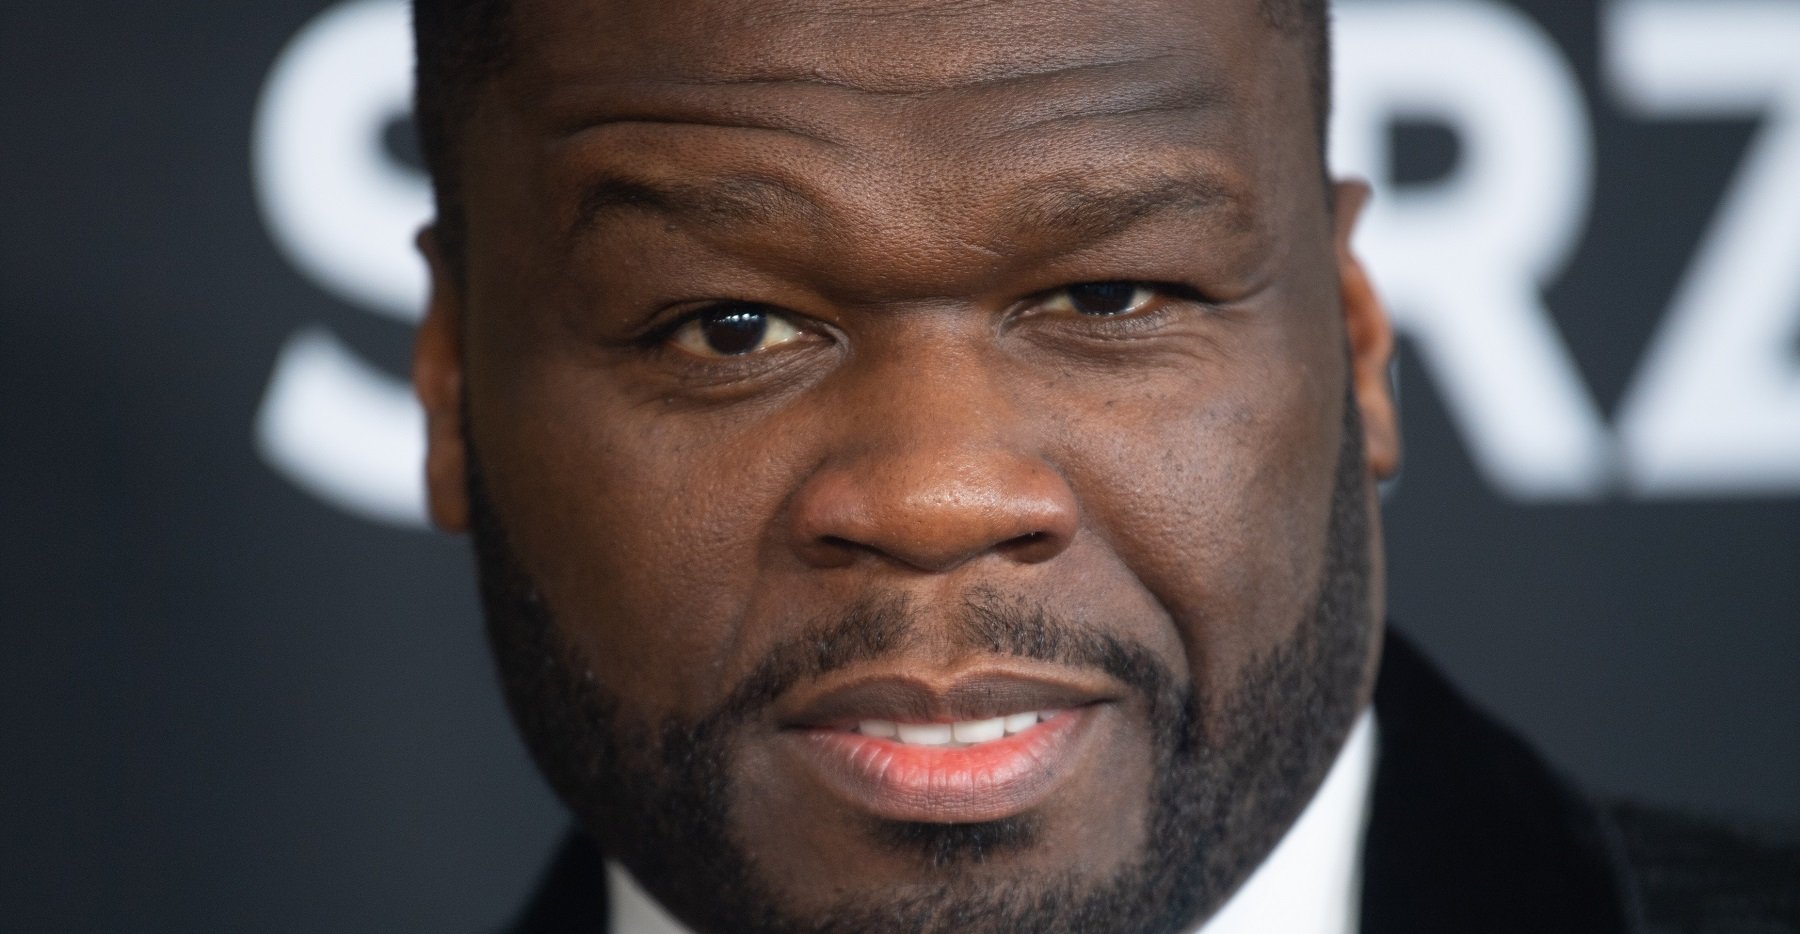 BMF was created by Curtis Jackson, aka 50 Cent, pictured here in a headshot